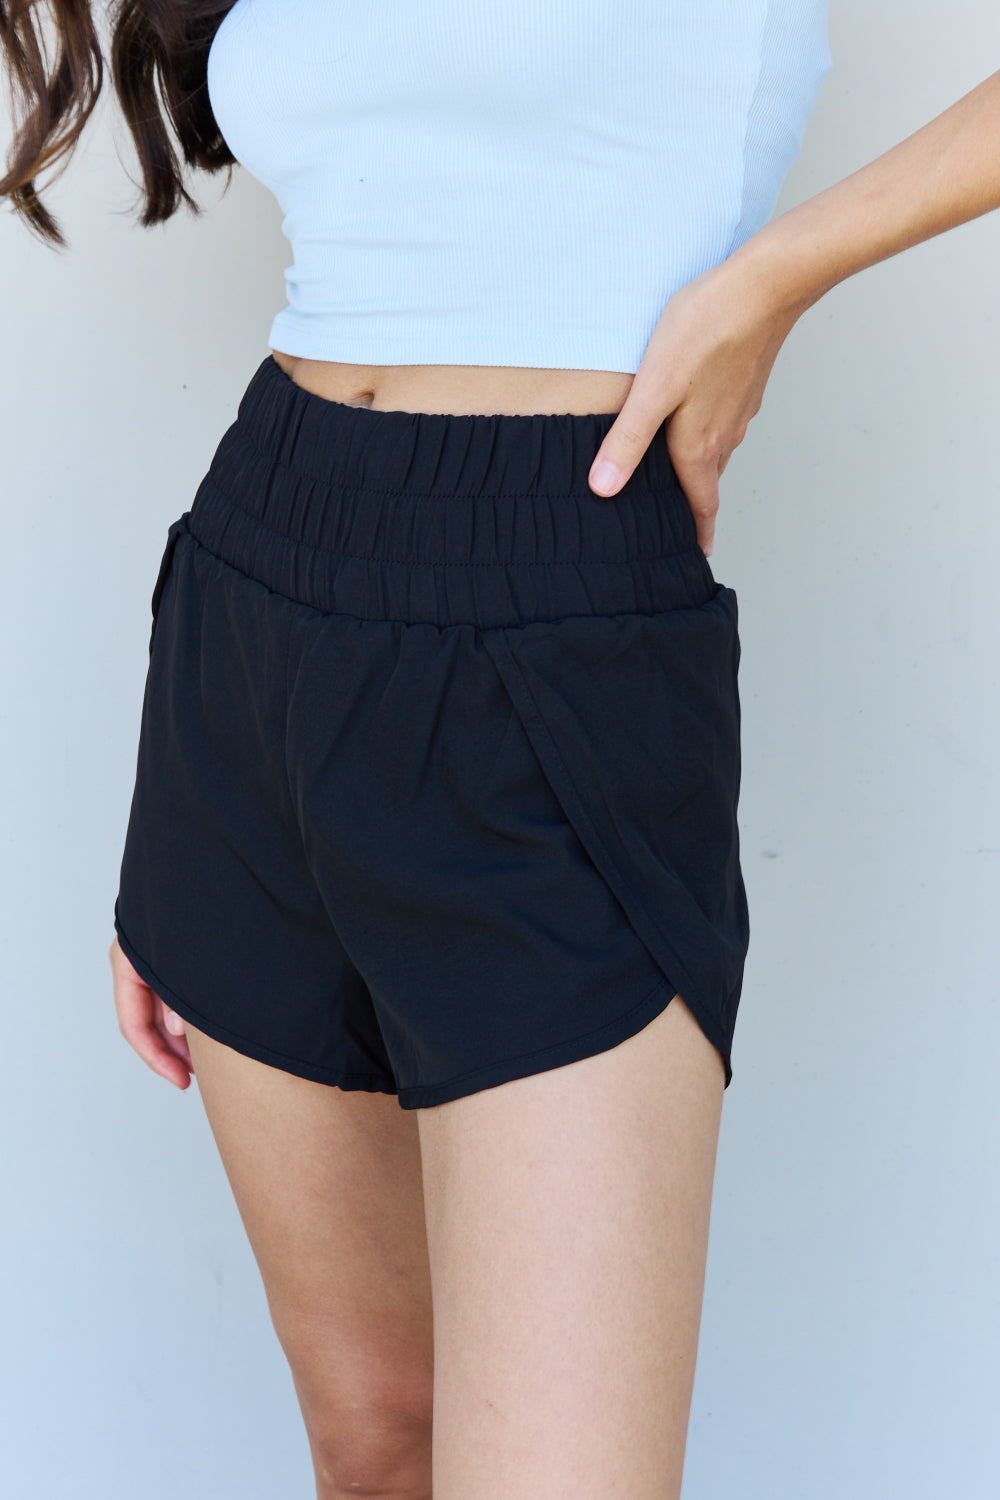 Ninexis Stay Active High Waistband Active Shorts in Black Trendsi